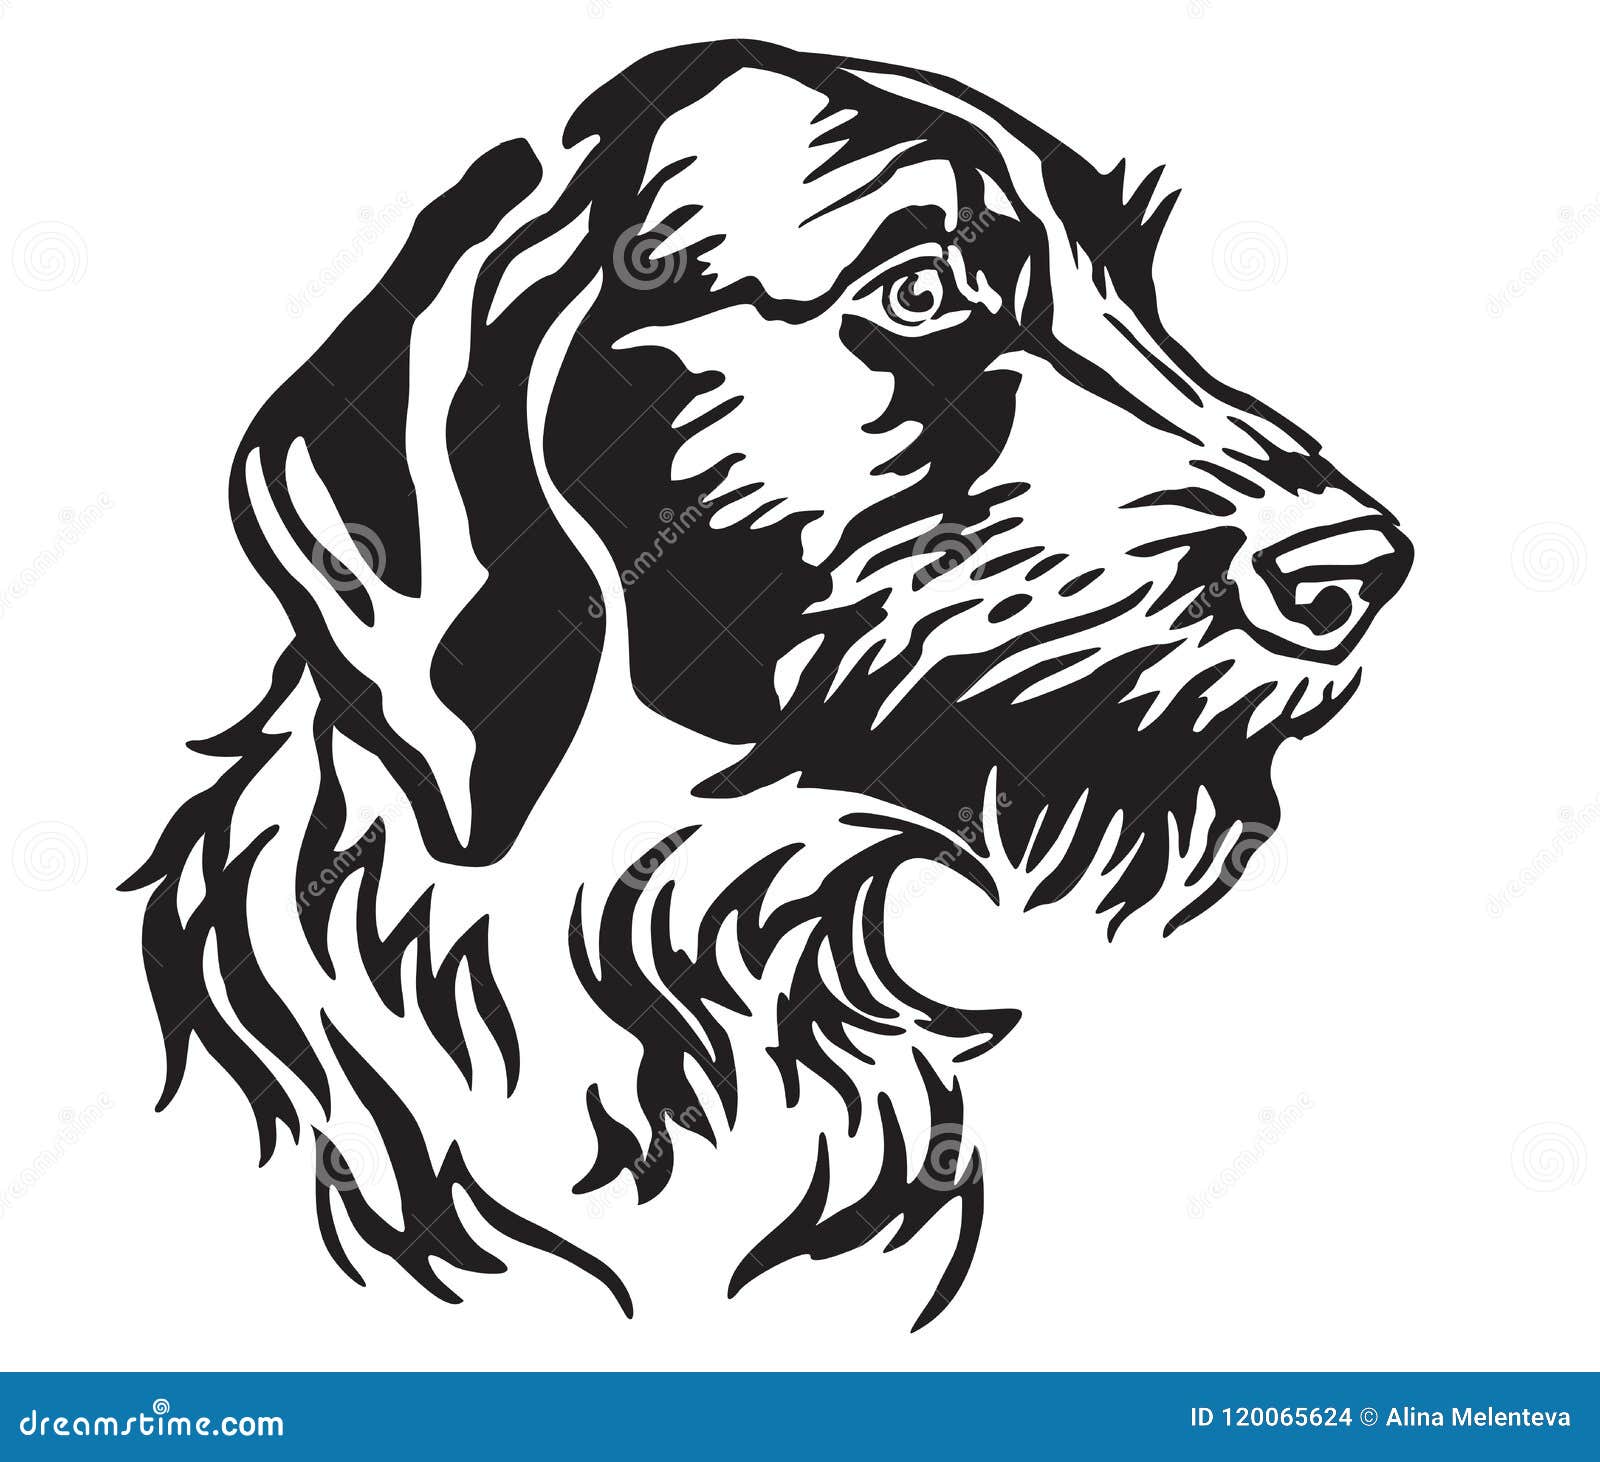 10 Best German Shorthaired Pointer Tattoo Designs  The Paws